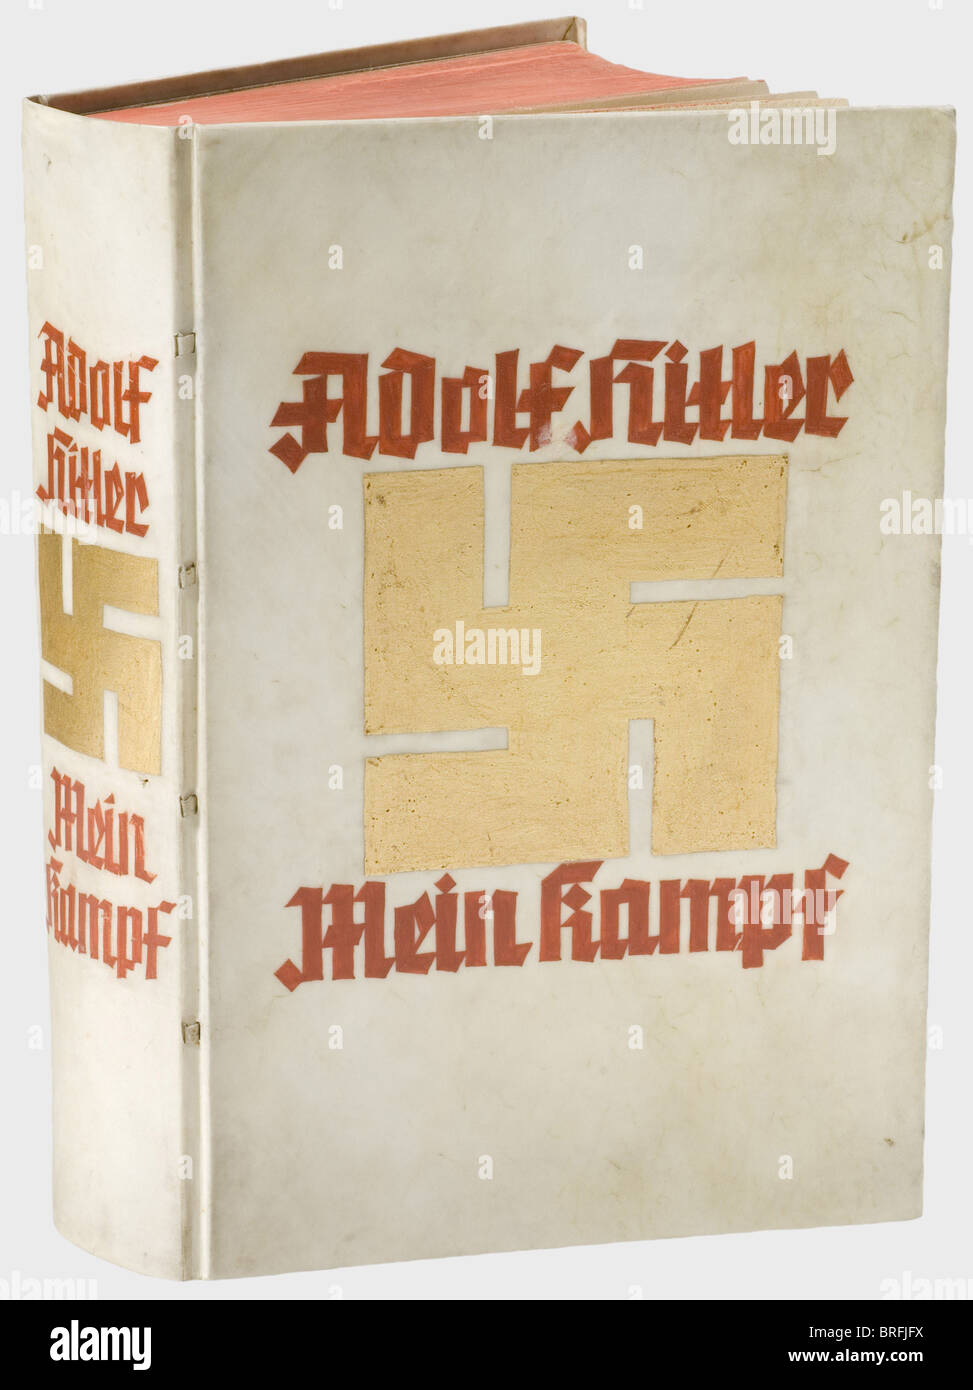 Max Wünsche - a presentation edition of 'Mein Kampf' for his 1939 birthday with a dedication by Hitler., A complete two-volume edition with calligraphy on the parchment binding. Back and binding bear golden swastikas and 'Adolf Hitler - Mein Kampf' in red. There is a dedication in ink on the flyleaf, 'Dem SS-Oberstürmführer Max Wünsche mit herzlichsten Glückwünschen zum heutigen Geburtstag - Adolf Hitler - Berlin/20 April 1939' (To SS-Oberstürmführer Max Wünsche with most sincere good wishes on today's birthday - Adolf Hitler - Berlin/20 April 1939). Wood cut p, Stock Photo